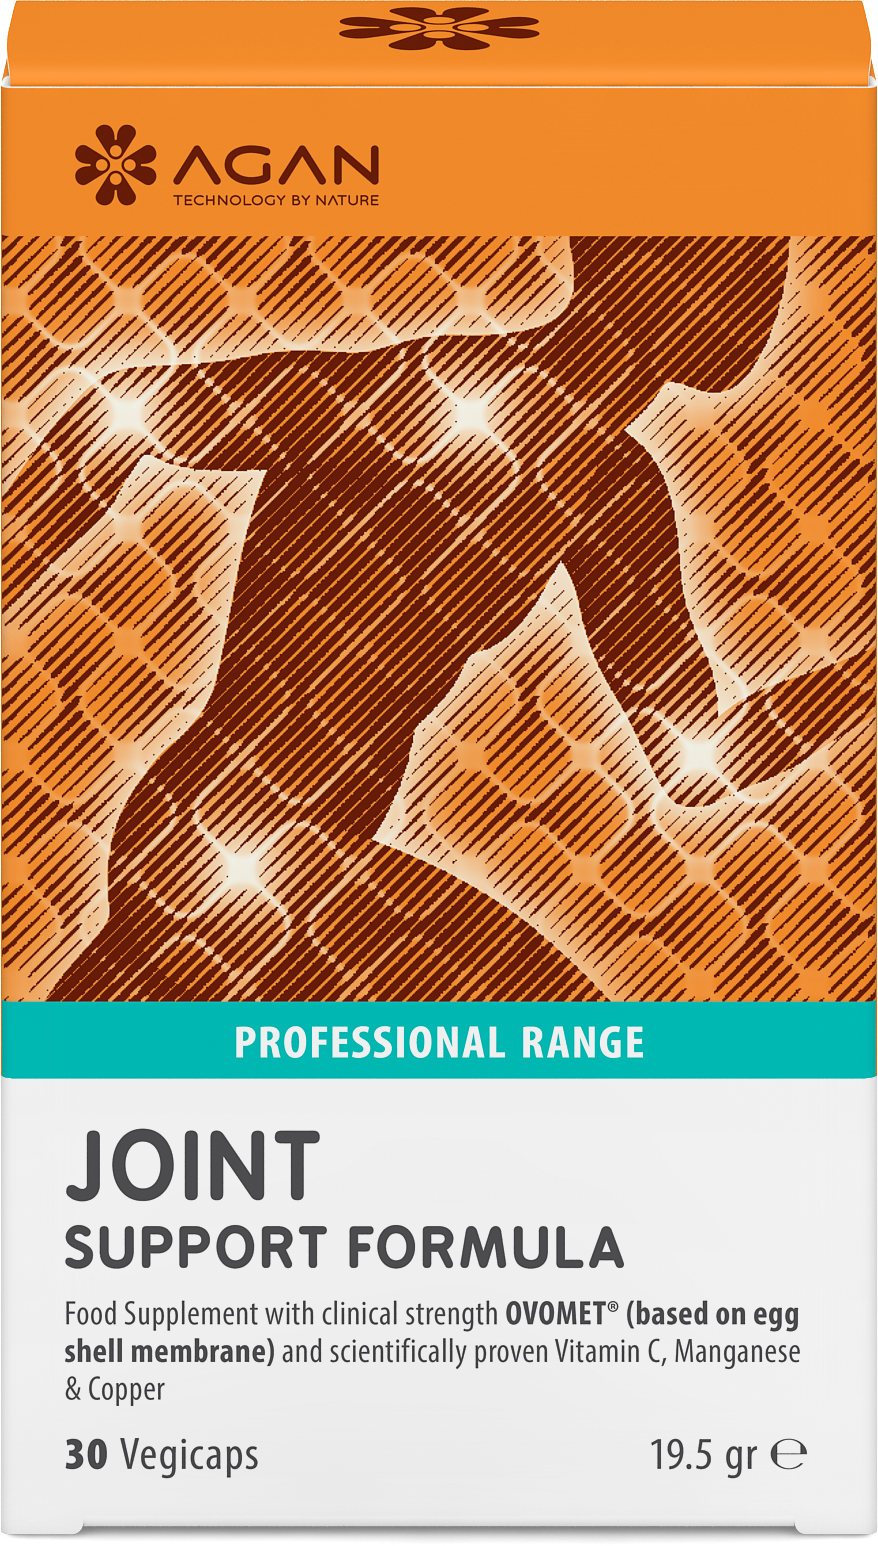 AGAN JOINT SUPPORT